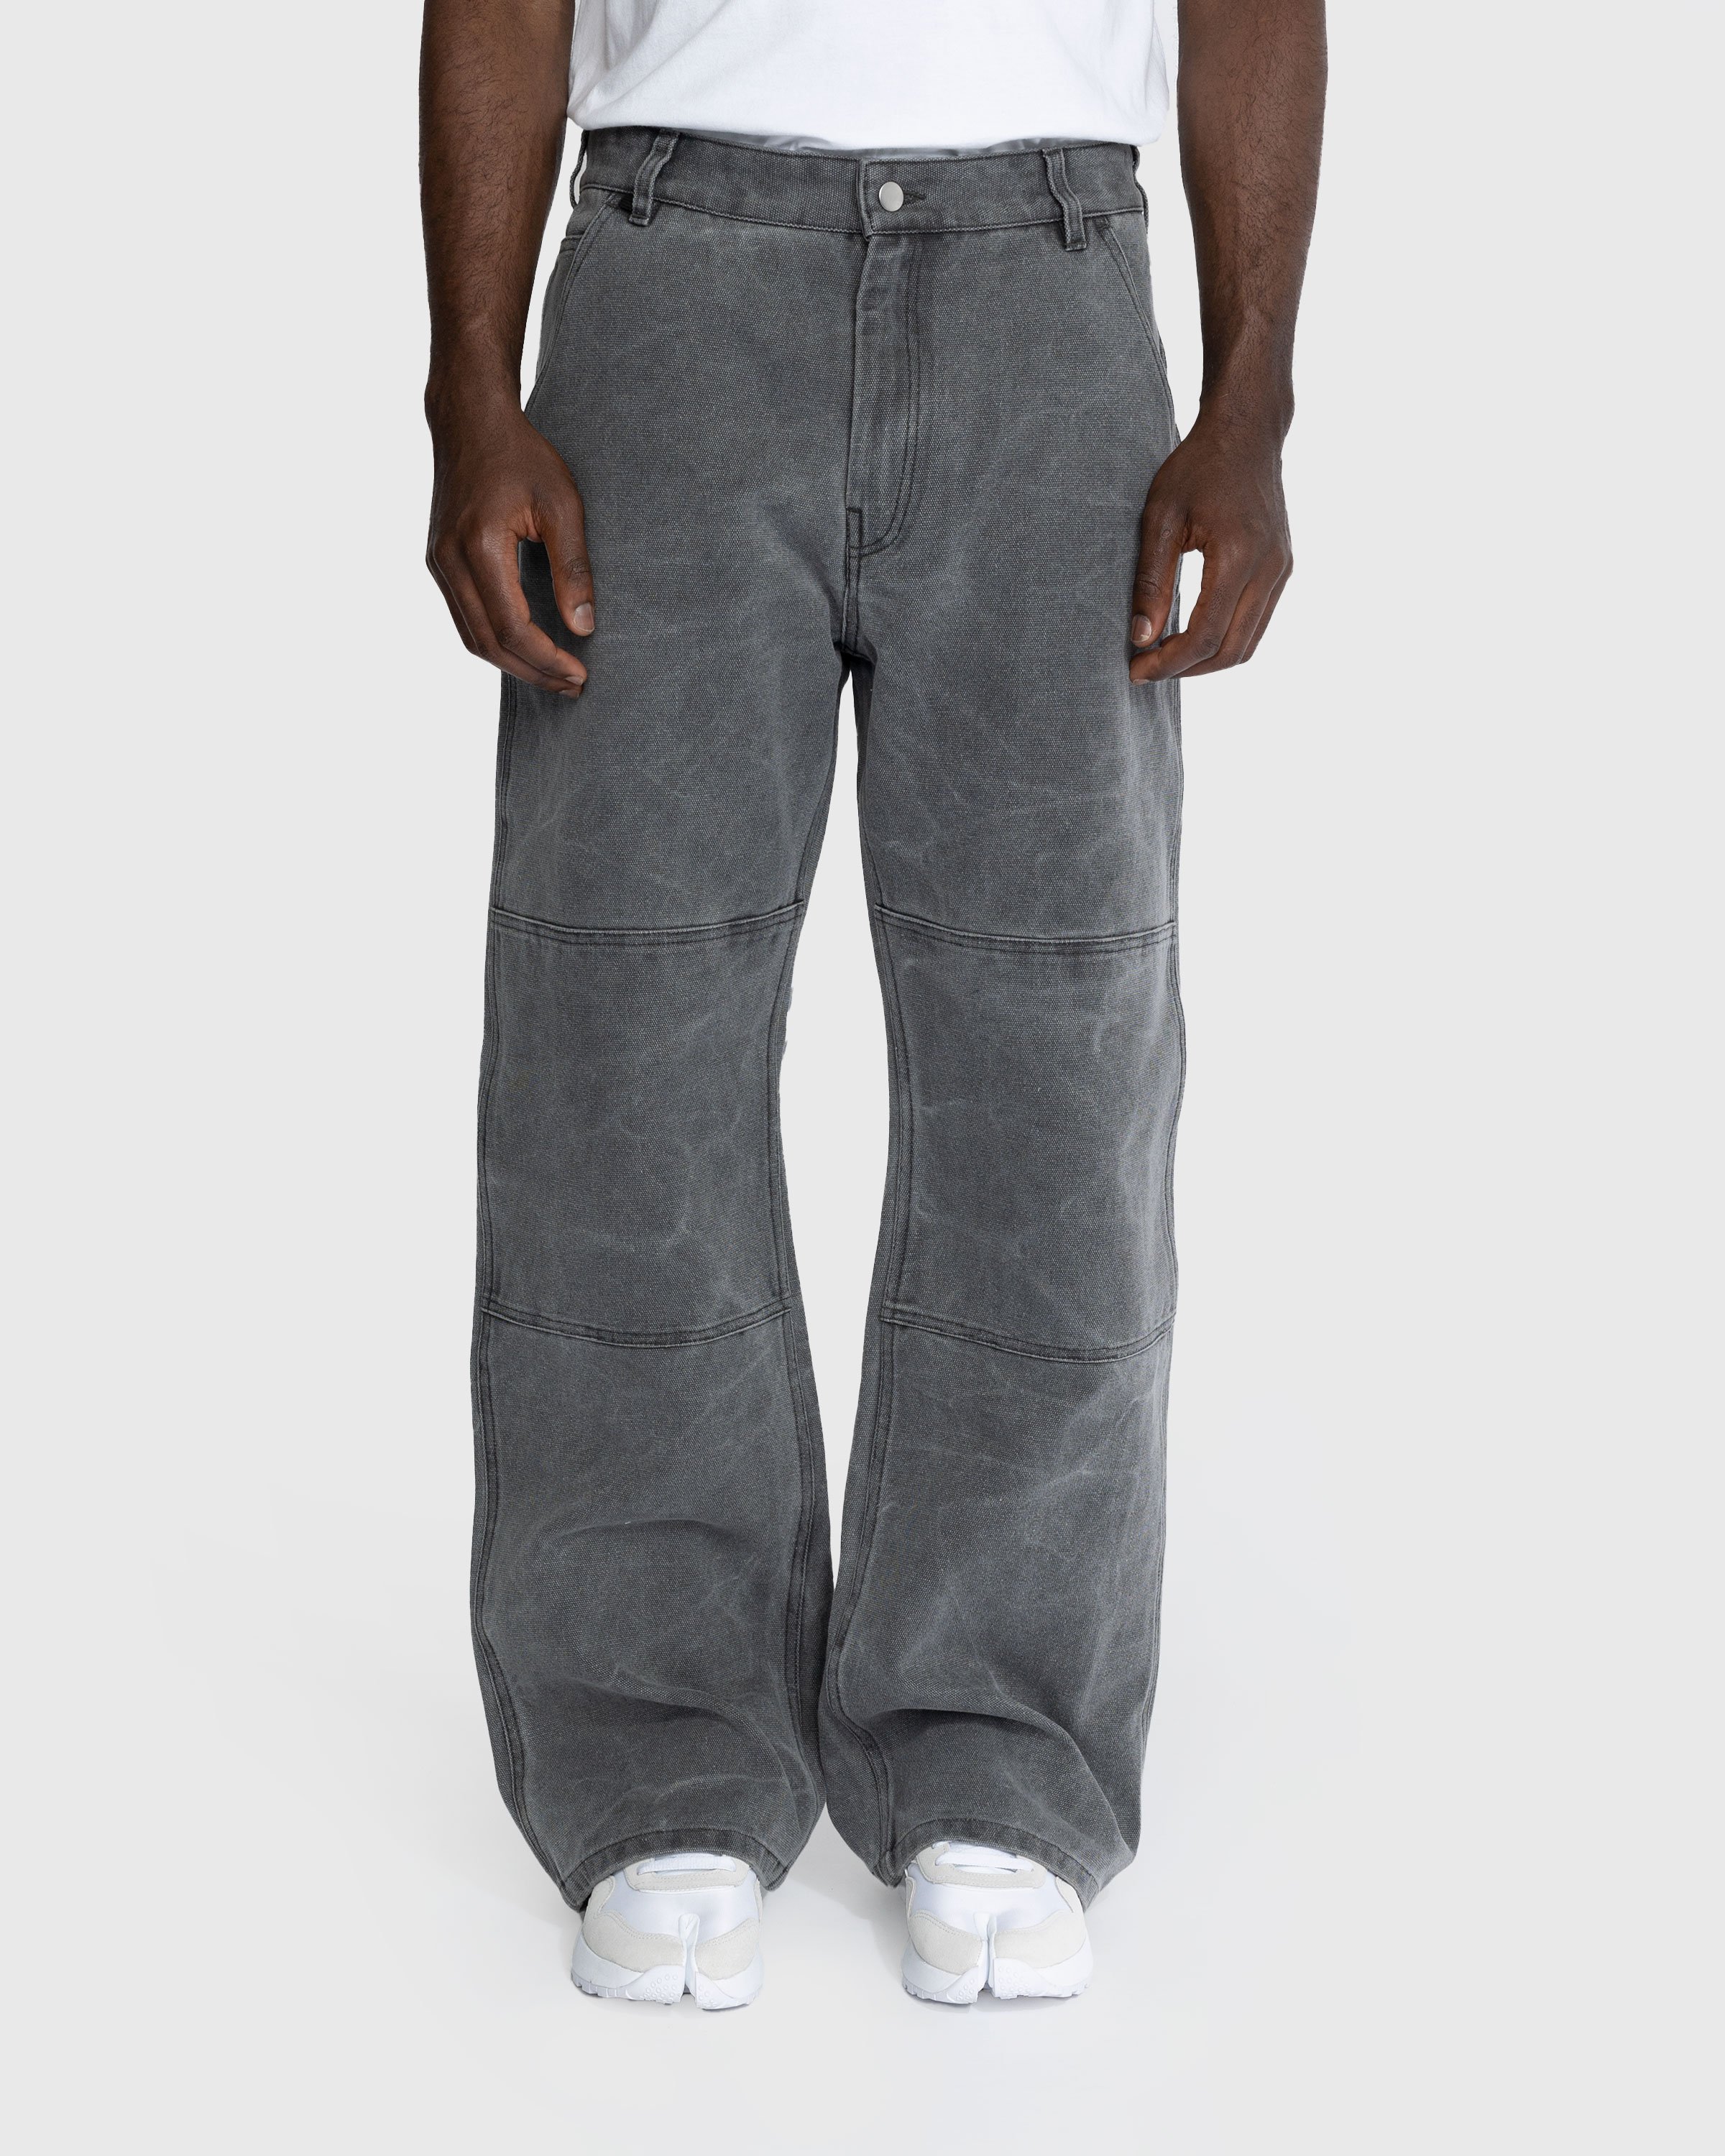 Acne Studios - Cotton Canvas Trousers Grey - Clothing - Grey - Image 2